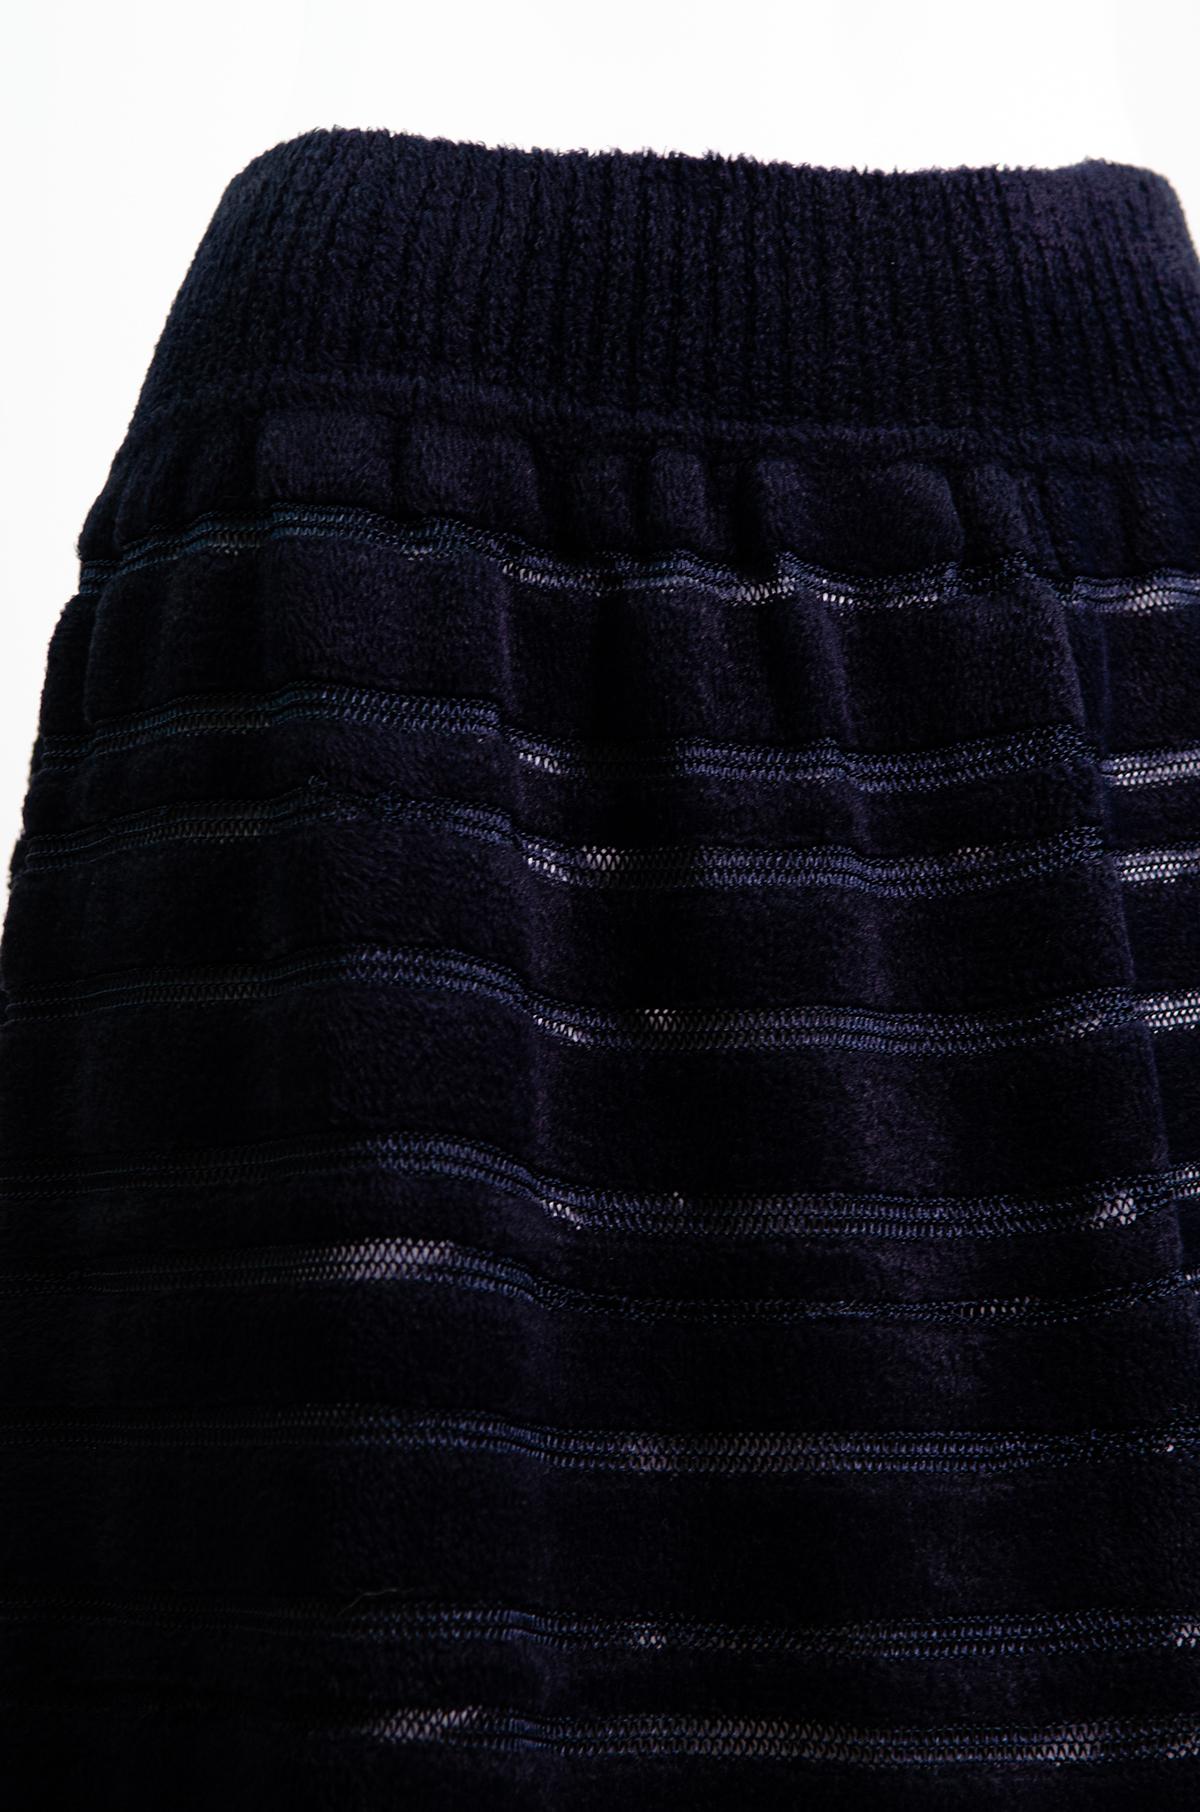 Azzedine Alaïa Vintage 1990s Semi-sheer Navy Mini Skirt

Brand: Alaïa

Designer: Azzedine Alaïa

Collection / Year: 1990s

Color: Navy

Size: L

Gorgeous vintage mini skirt by Azzedine Alaïa. So soft, this plush navy skirt features am a-line cut and